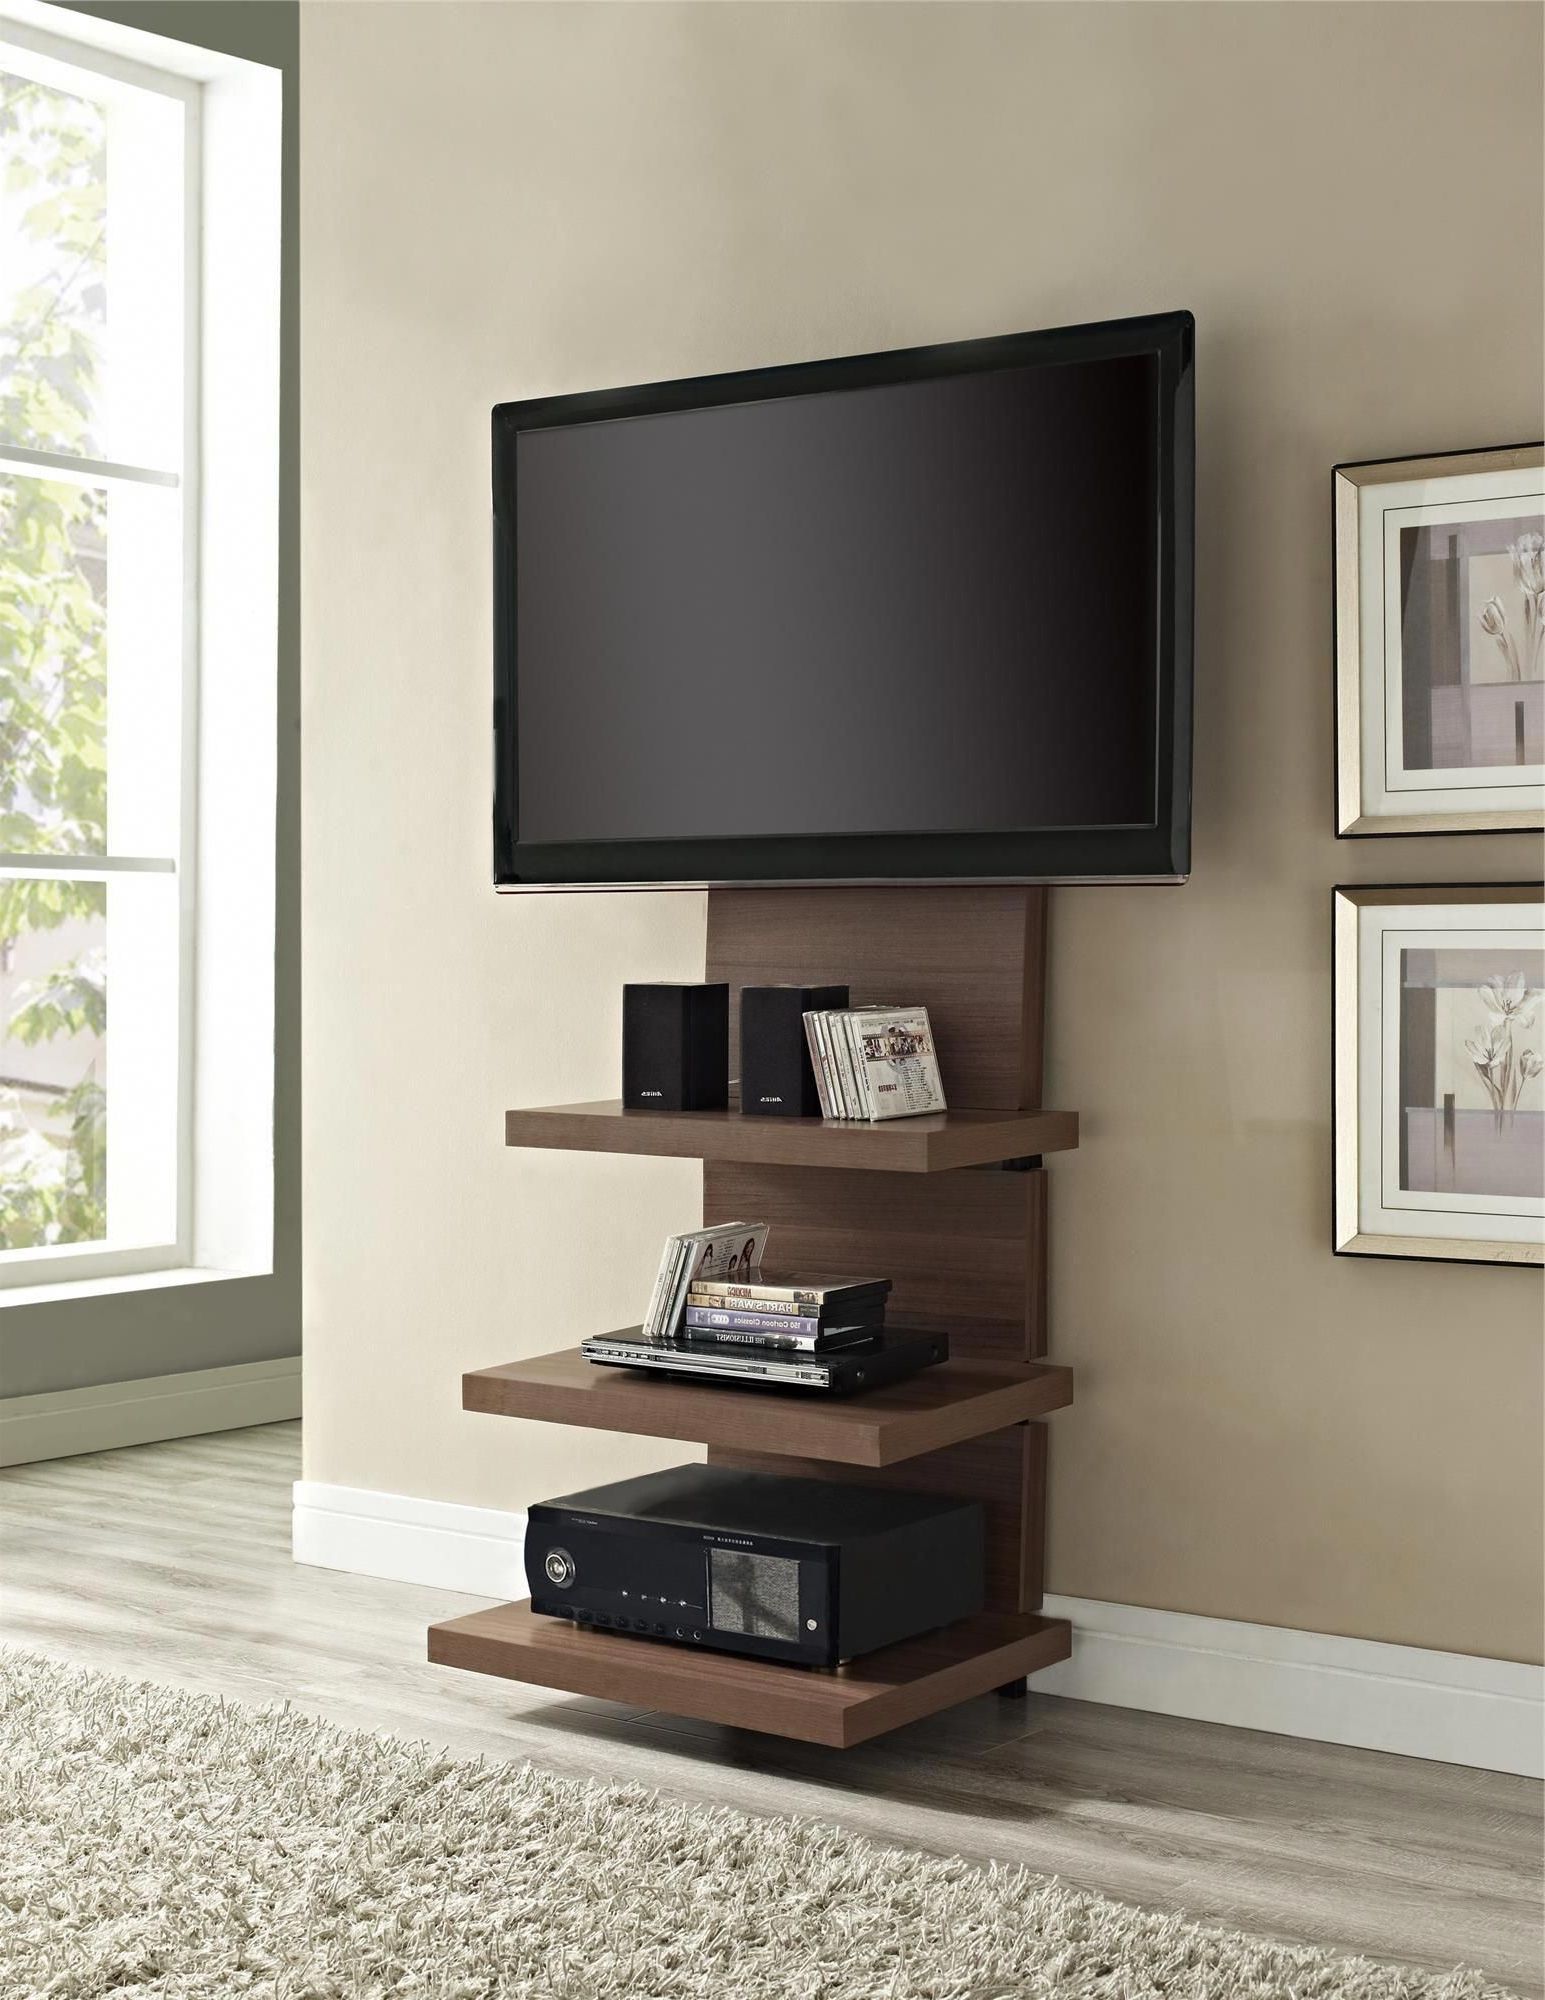 2017 Furniture, Cool Custom Modern Vertical Wood Tv Stands With Floating Intended For Cool Tv Stands (View 1 of 20)